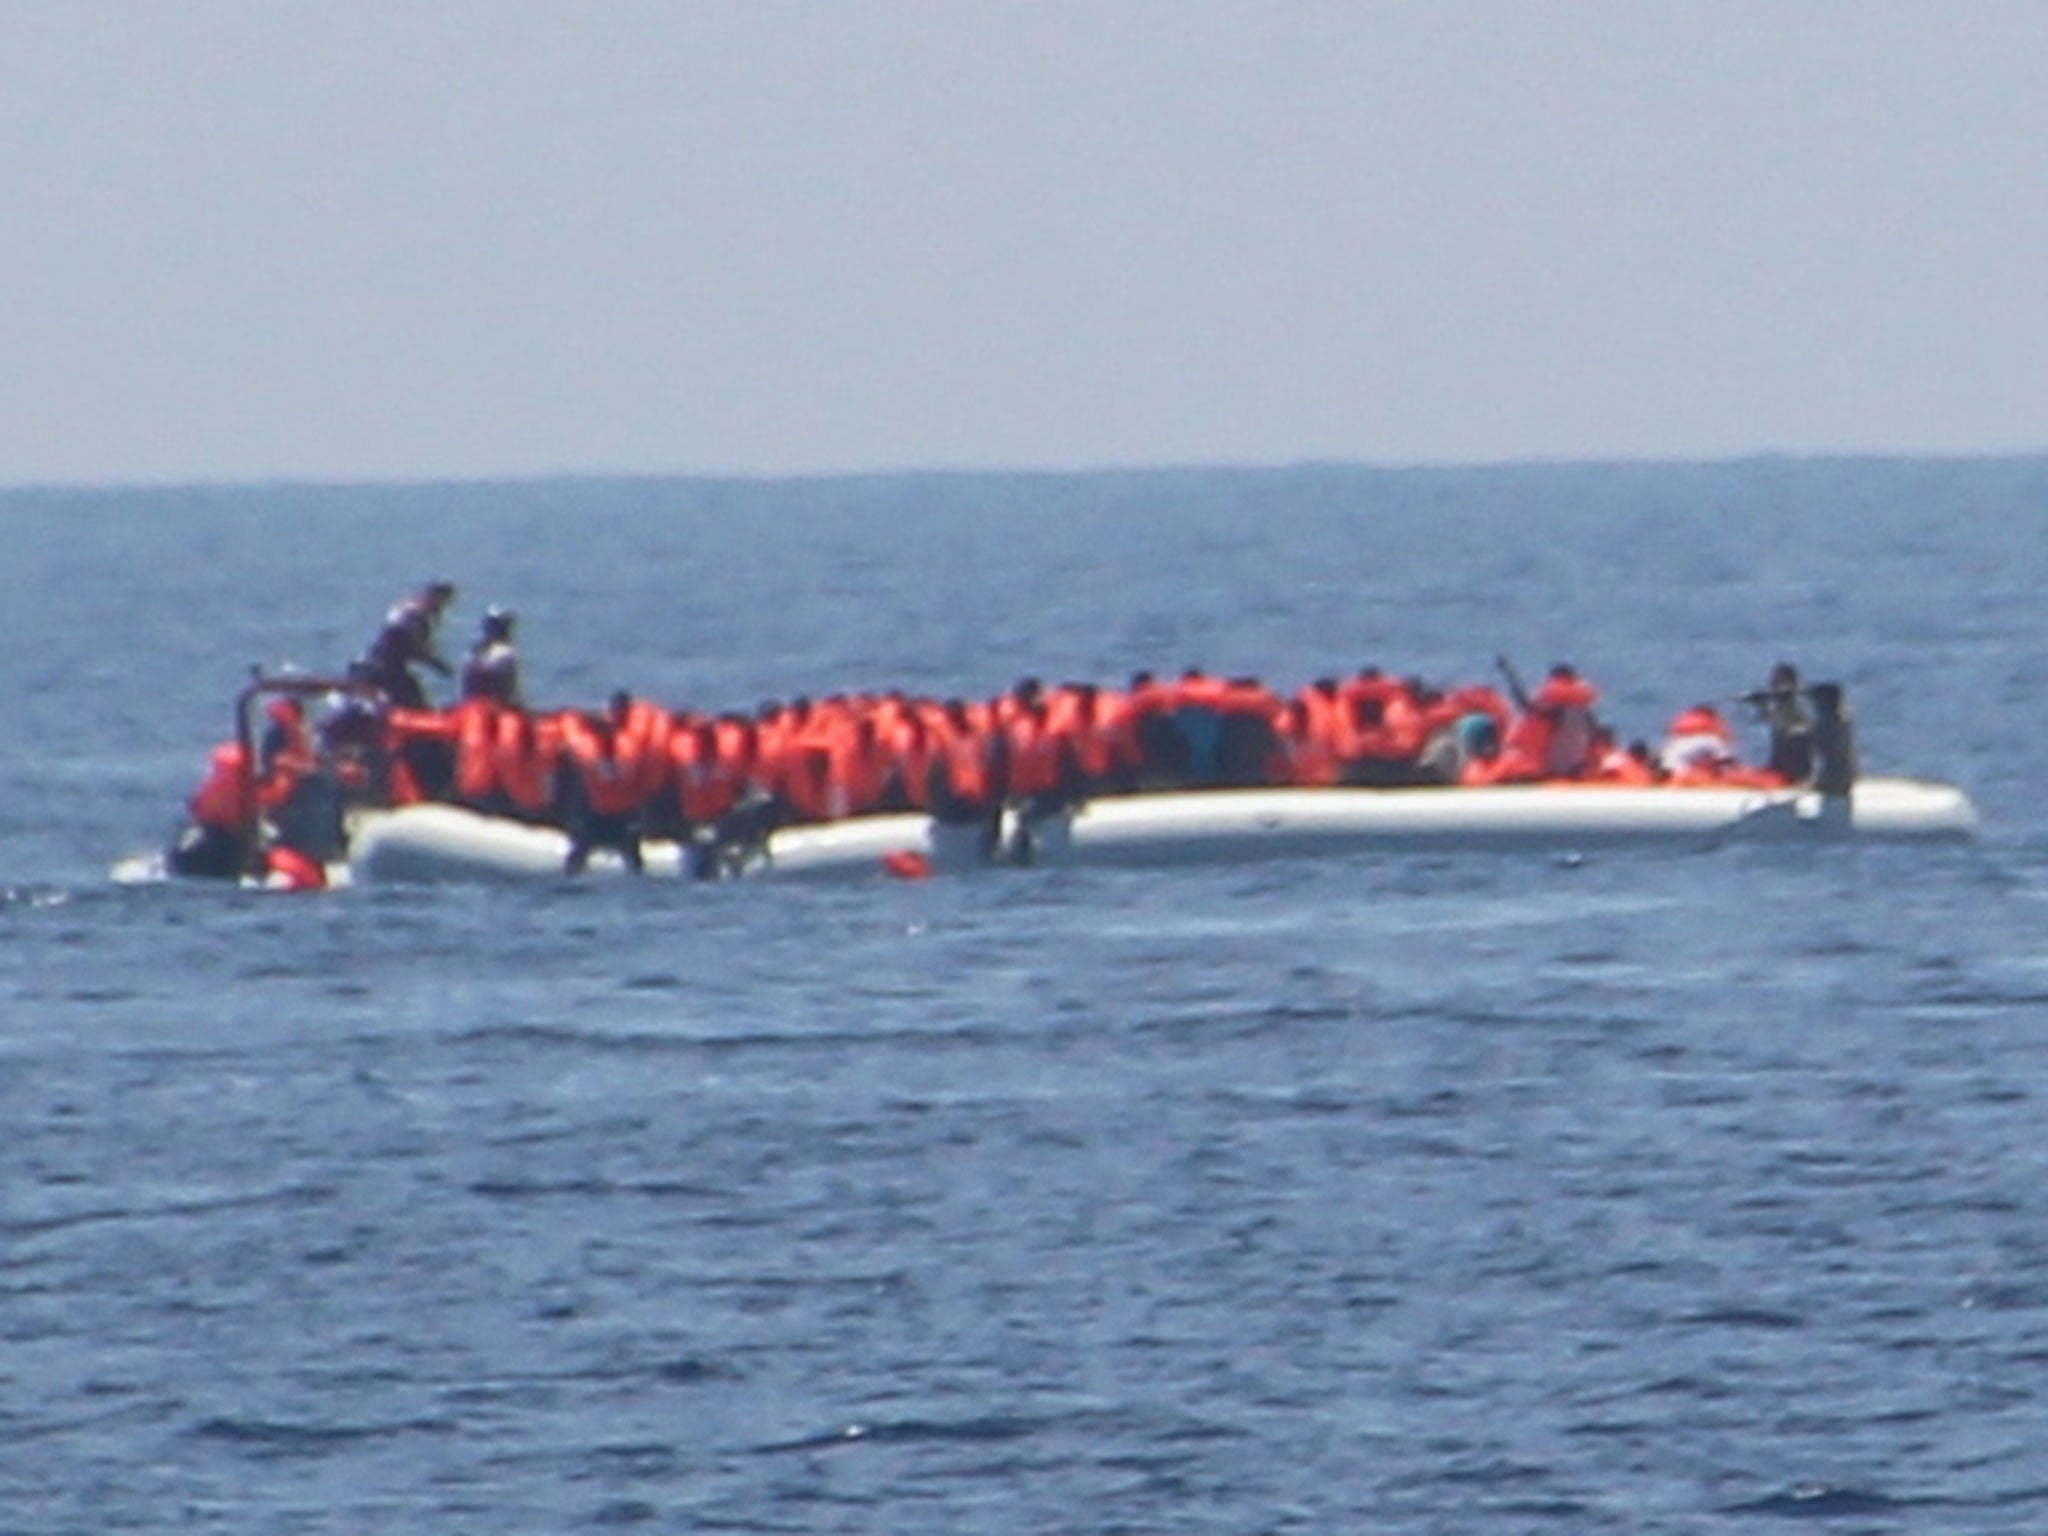 The crew of Jugend Rettet's Iuventa rescue ship photographed what appeared to be a Libyan coastguard officer pointing a weapon at refugees (far right)